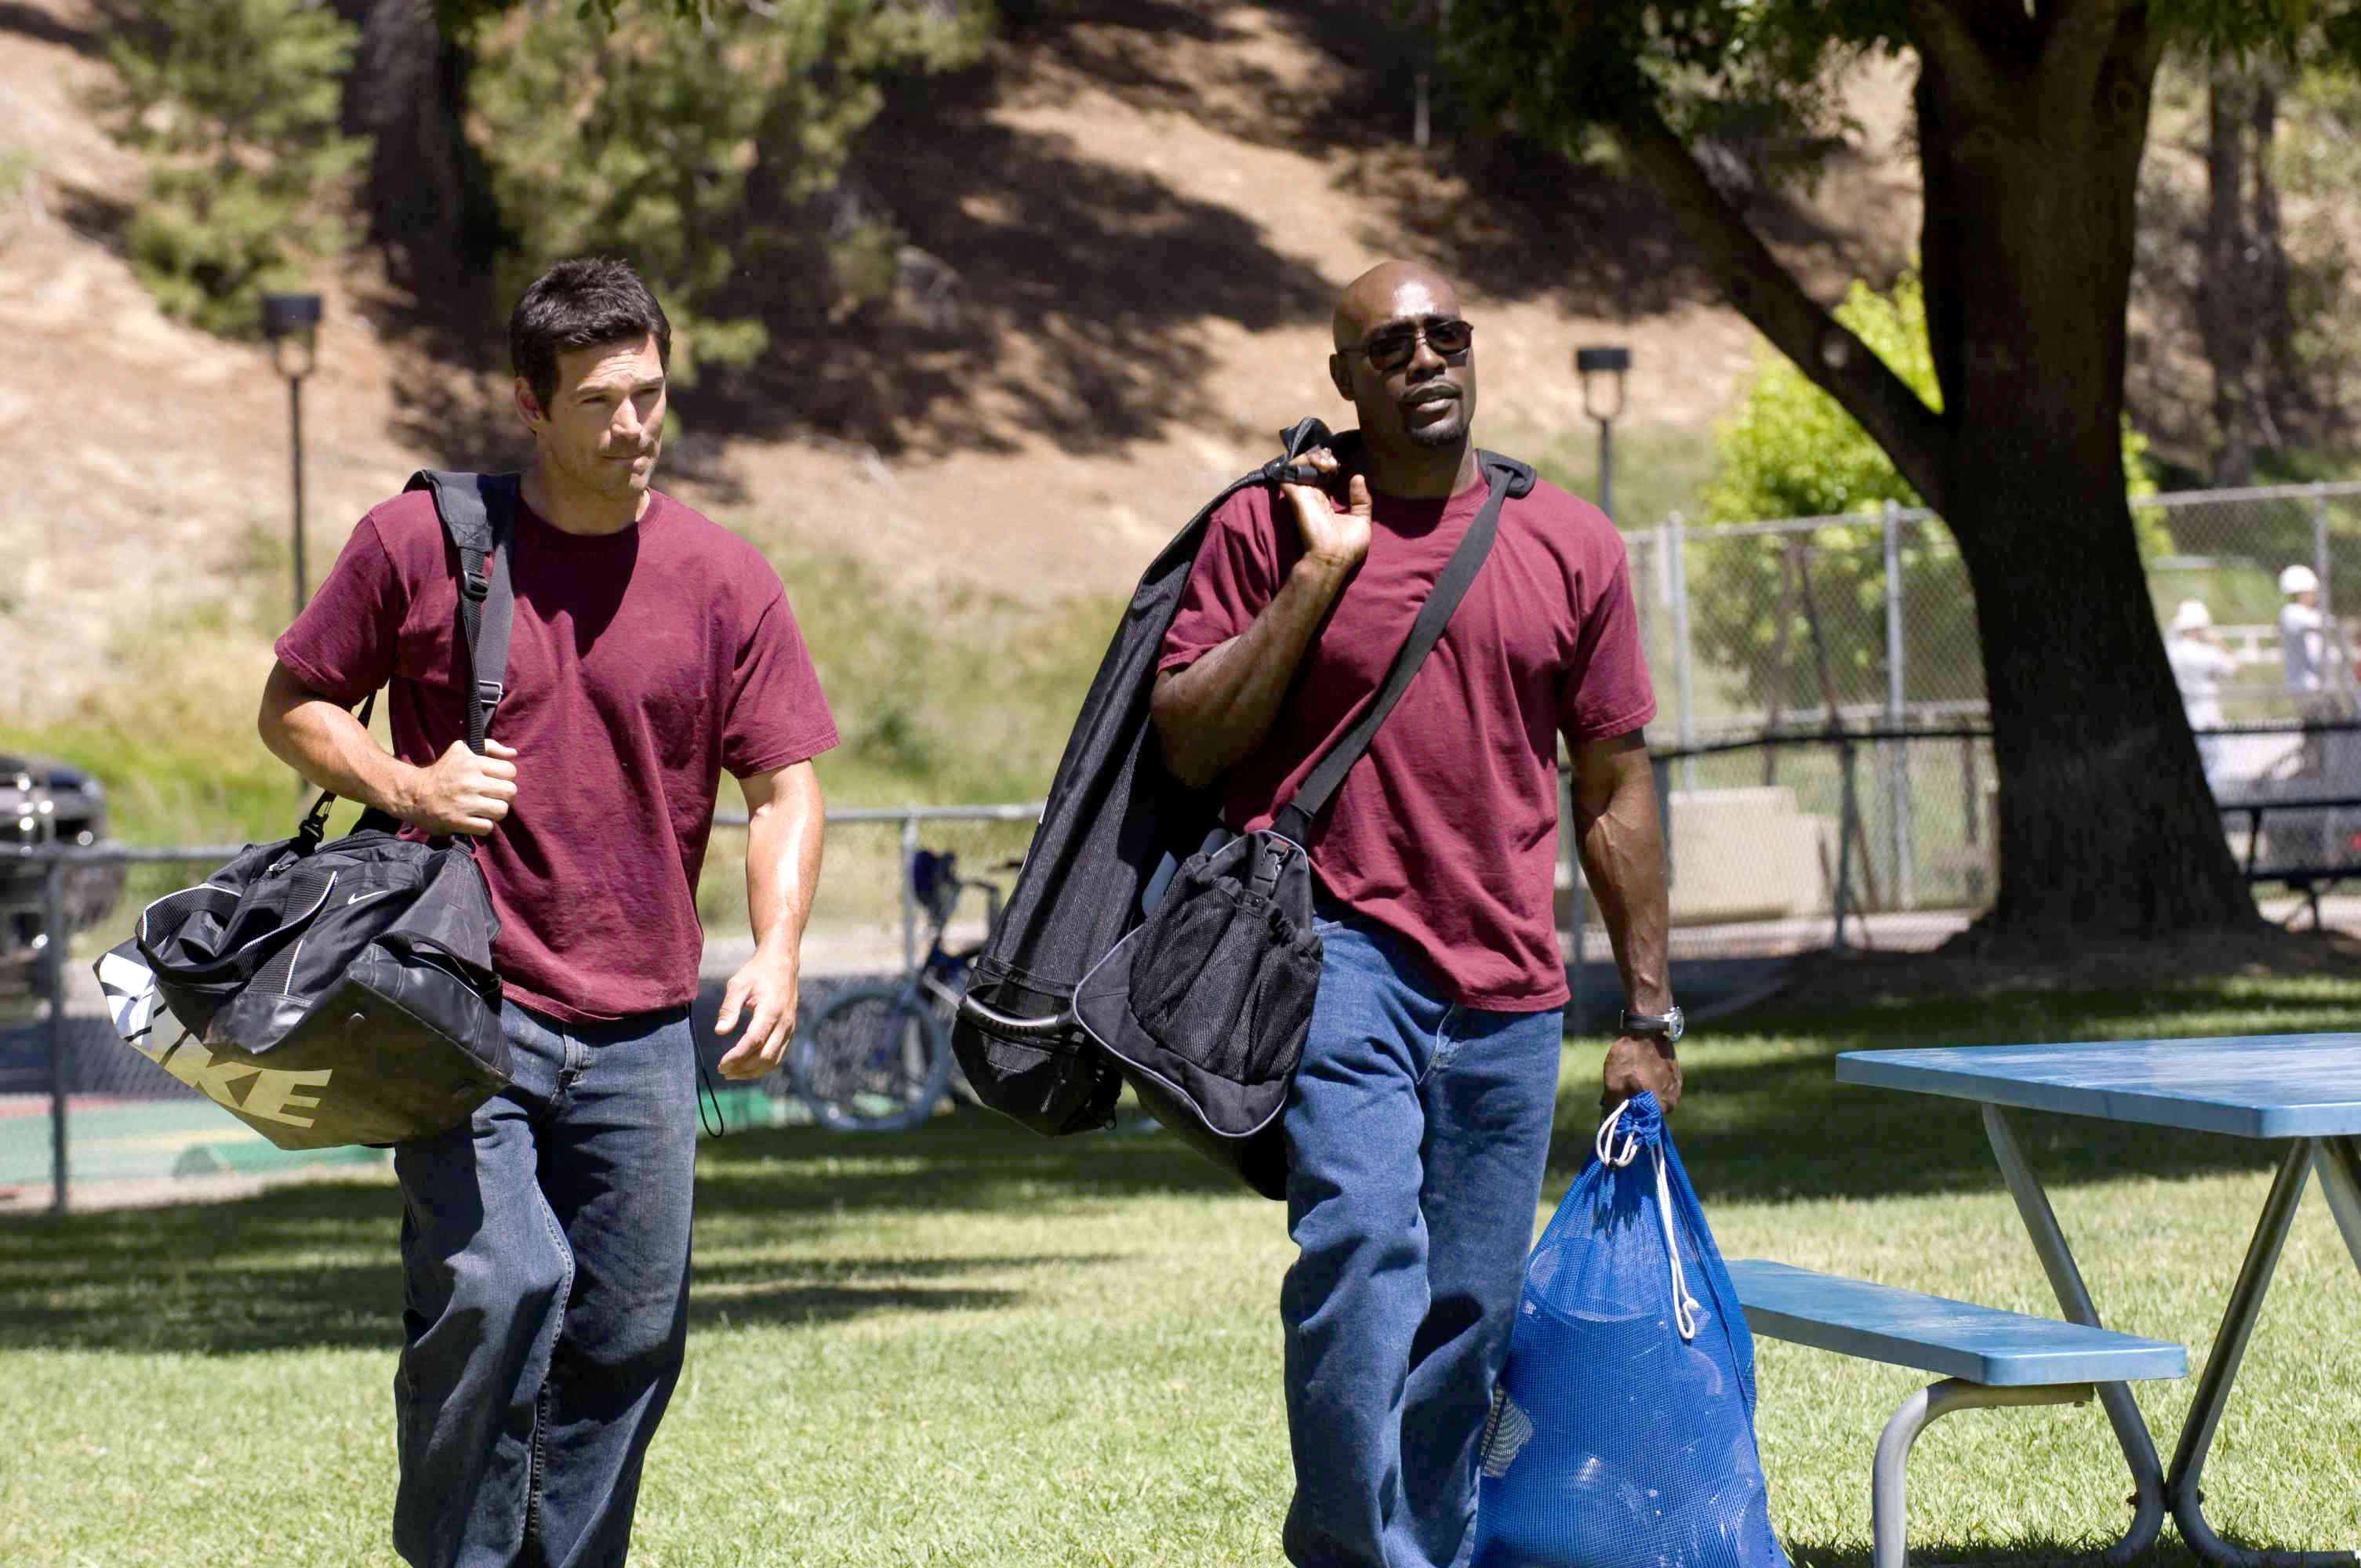 Eddie Cibrian stars as Brock Houseman and Morris Chestnut stars as Dave Johnson in Screen Gems' Not Easily Broken (2009). Photo credit by Ron Phillips.